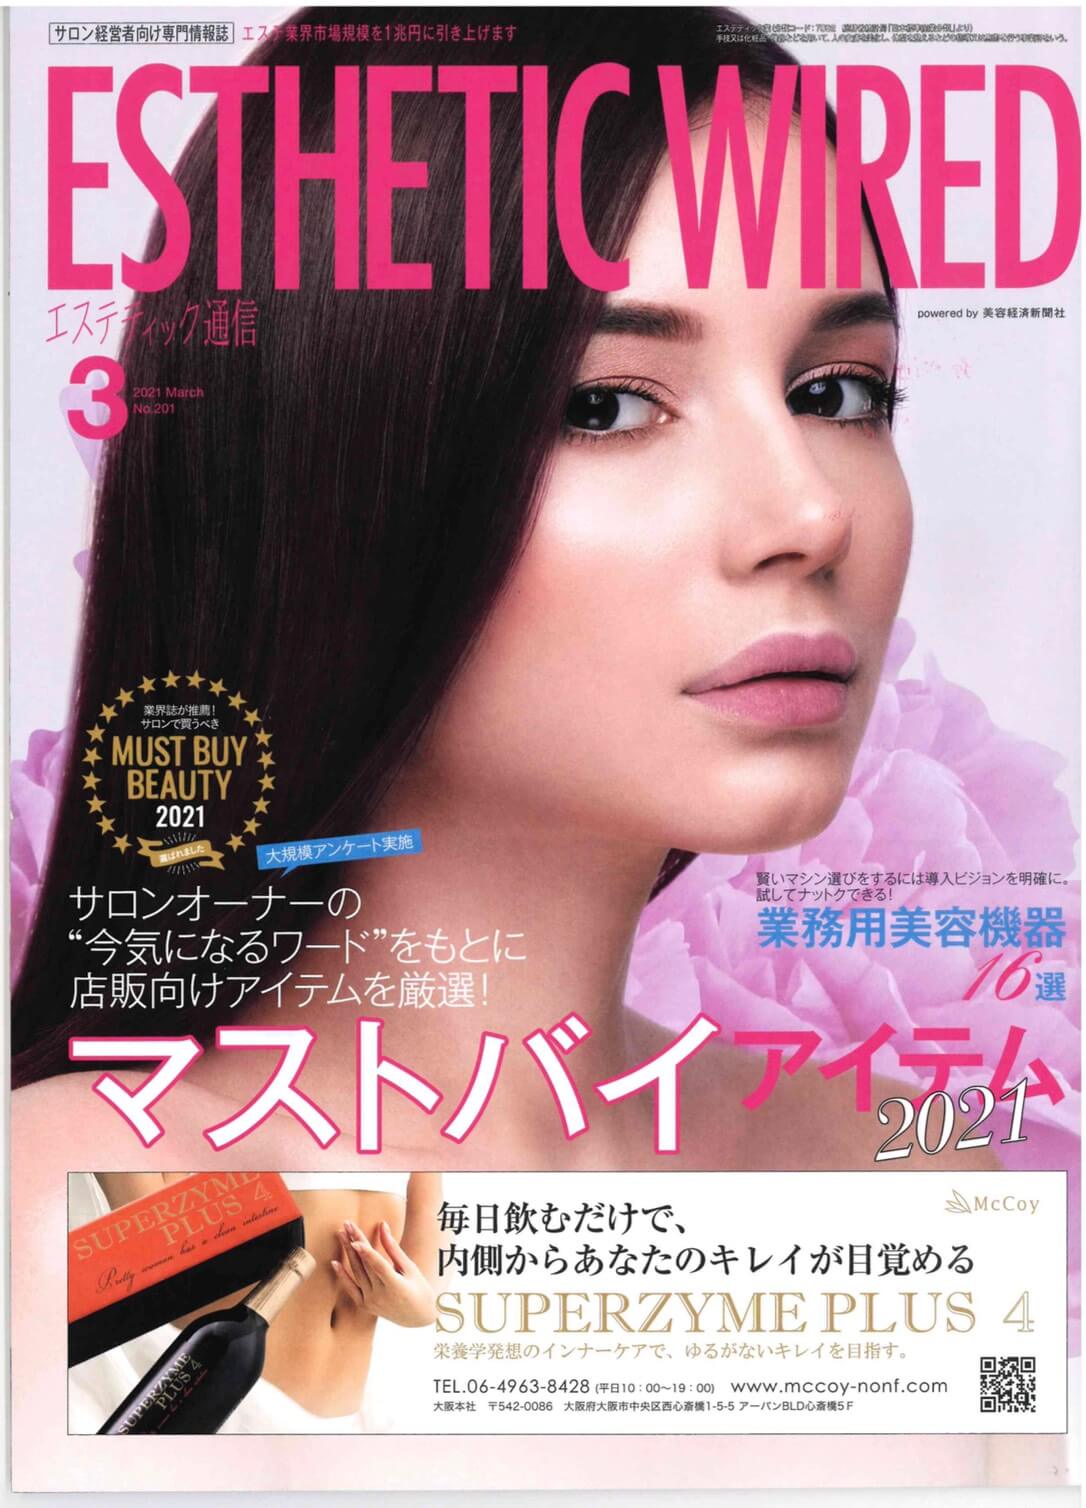 ESTHETIC WIRED 3月号